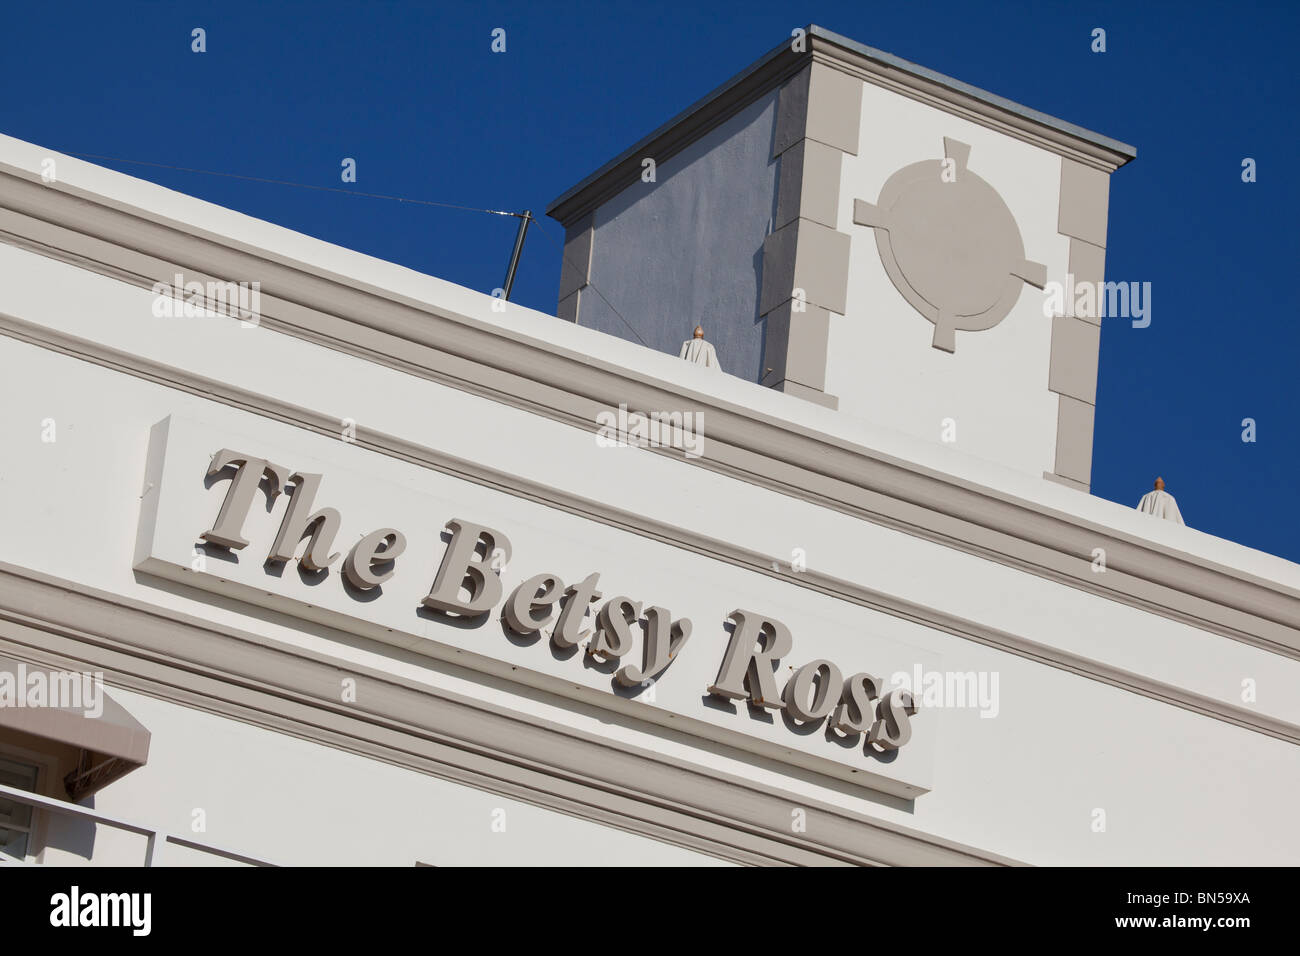 The Betsy Ross Hotel on Ocean Drive, Miami South Beach, Florida Stock Photo